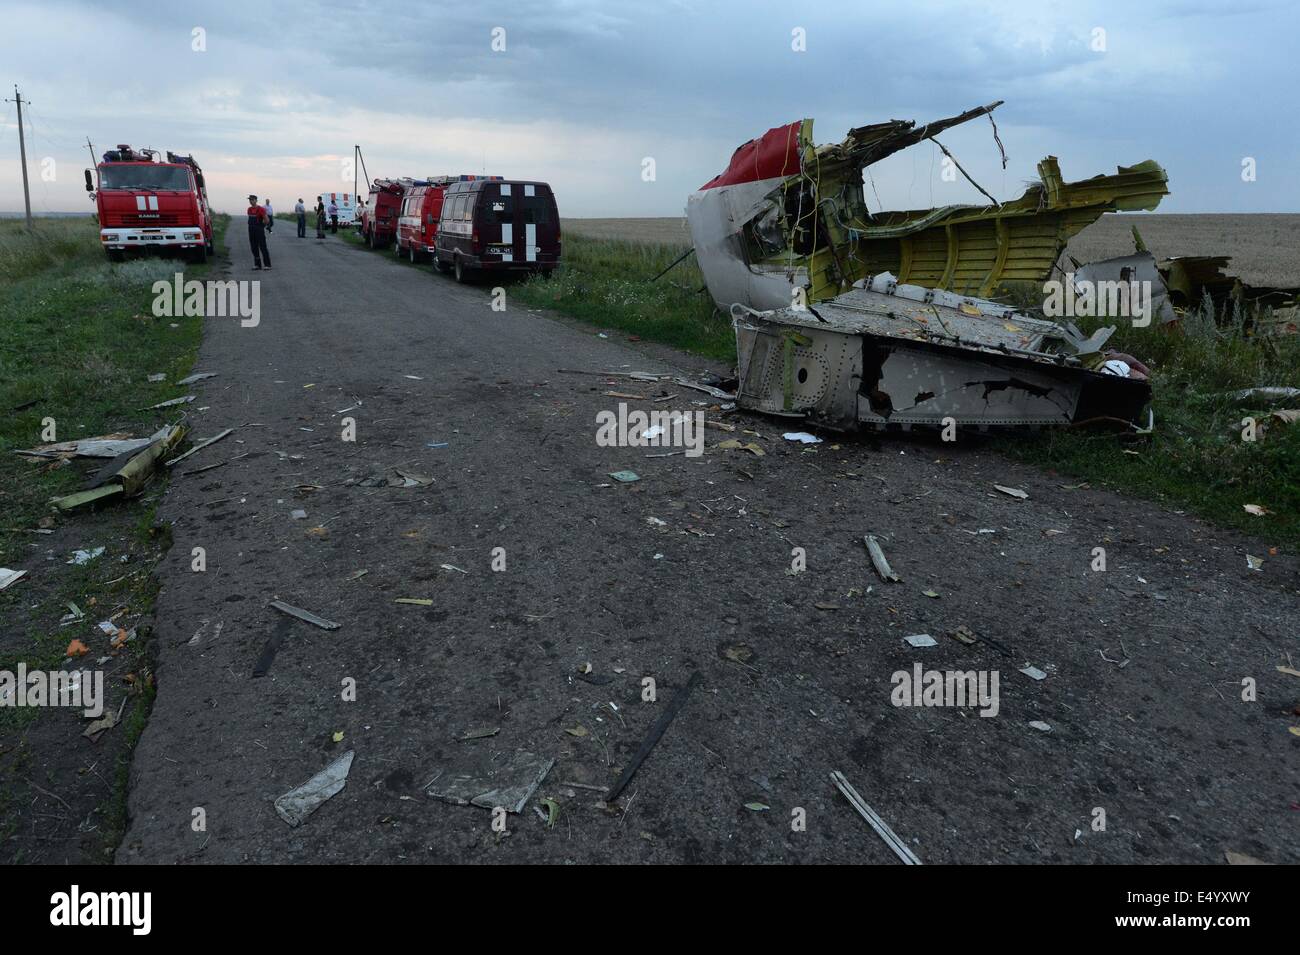 Grabovo, Ukraine. 17th July, 2014. Photo taken on July 17, 2014 shows the debris at the crash site of a passenger plane near the village of Grabovo, Ukraine. A Malaysian flight crashed Thursday in eastern Ukraine near the Russian border, with all the 280 passengers and 15 crew members on board reportedly having been killed. Credit:  RIA Novosti/Xinhua/Alamy Live News Stock Photo